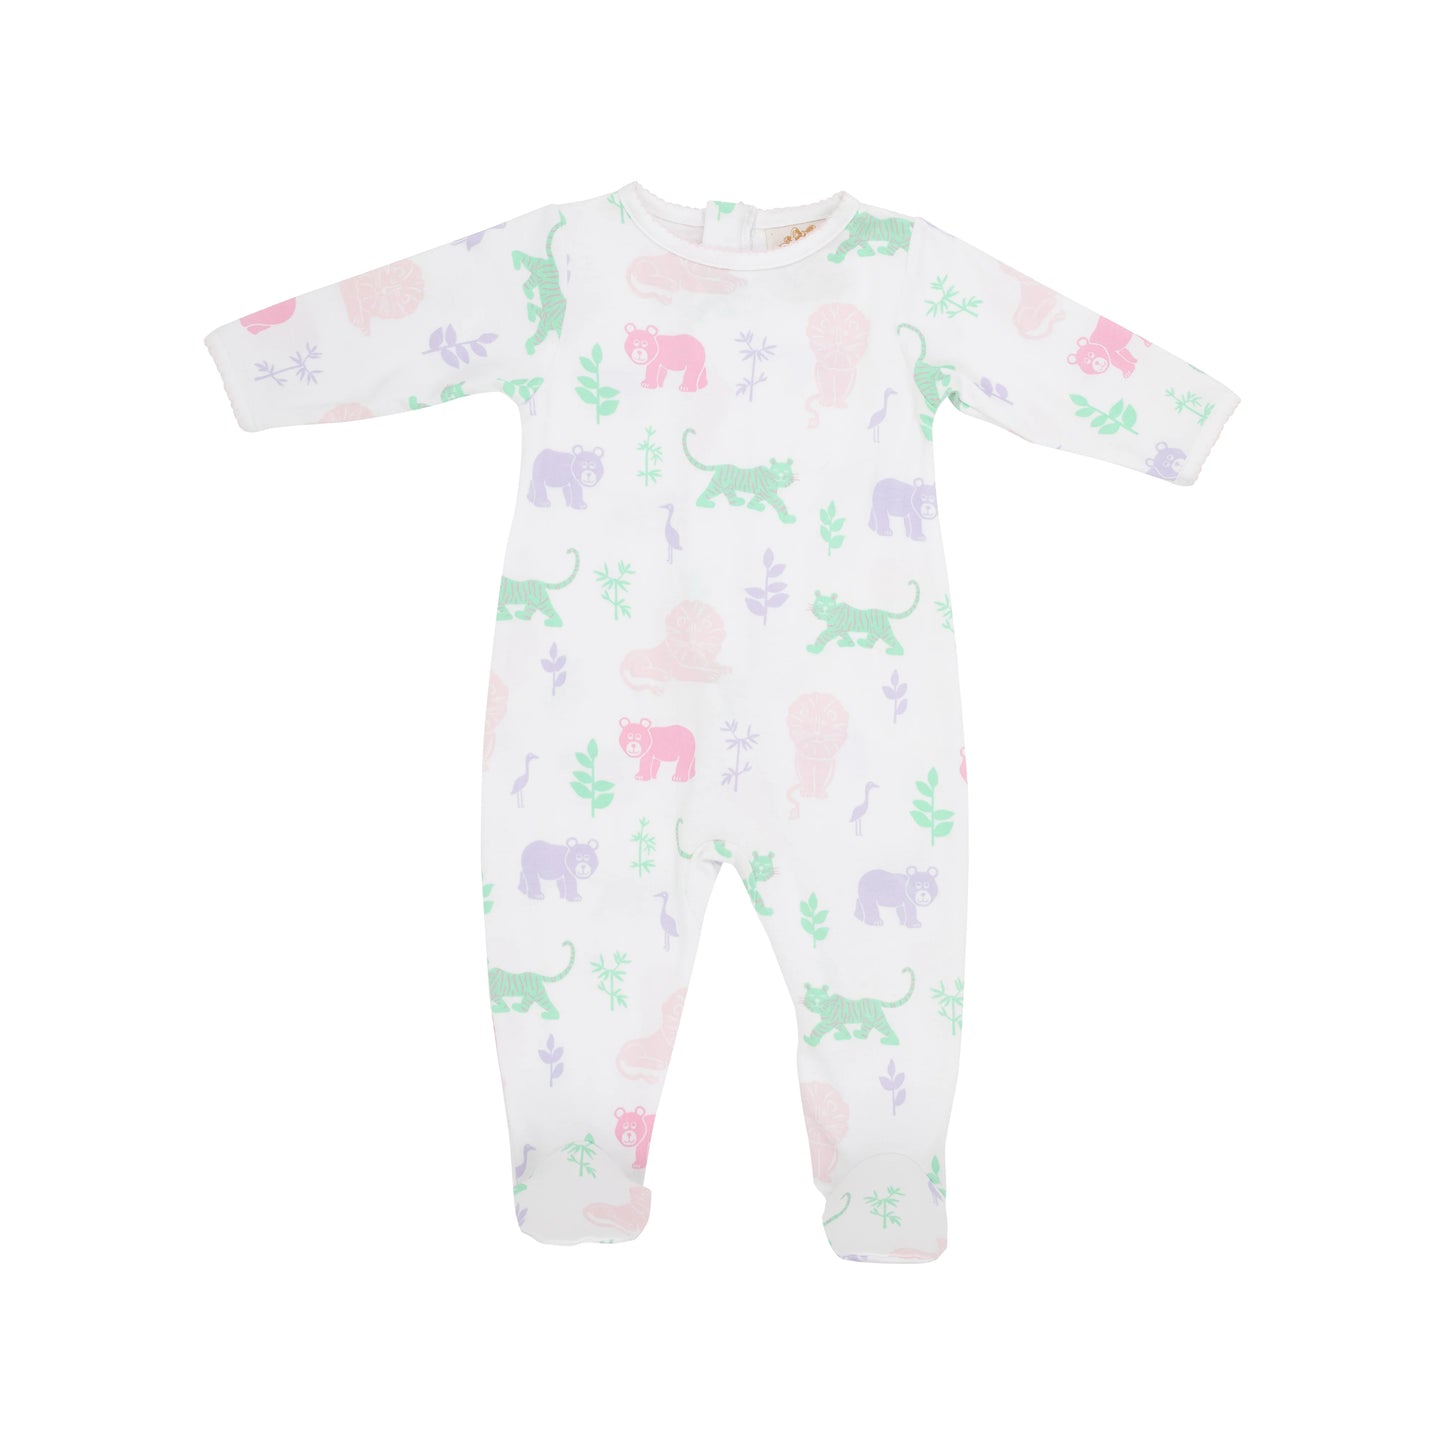 TBBC - Rock Me Romper Lions Tigers and Bears/Palm Beach Pink